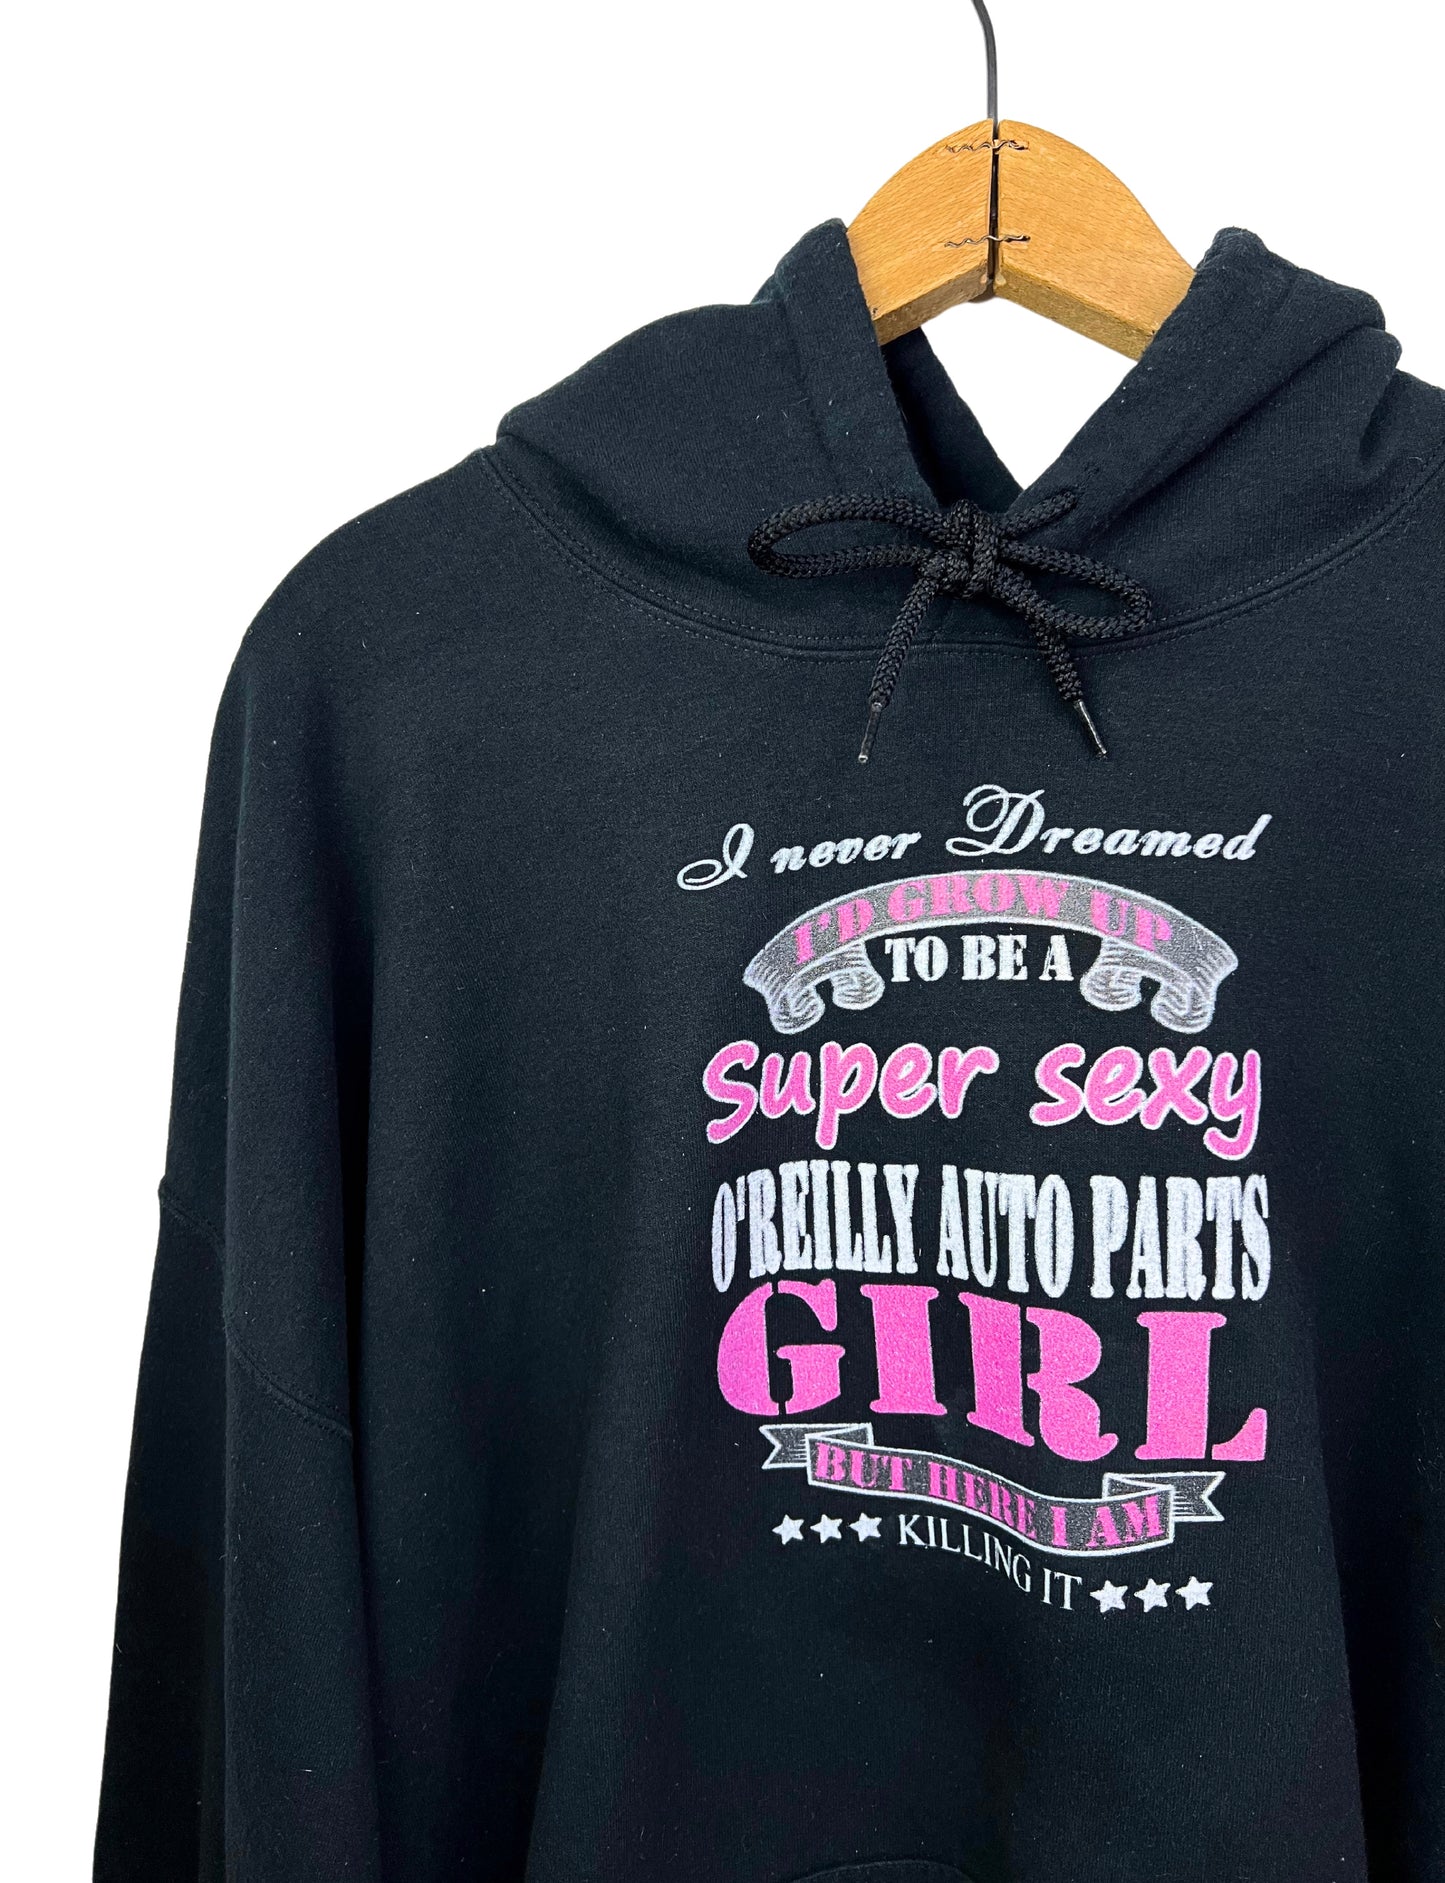 I Never Dreamed I’d Grow Up to be A Super Sexy O’Reily Auto Parts Girl But Here I Am Killing It Hoodie Size XL